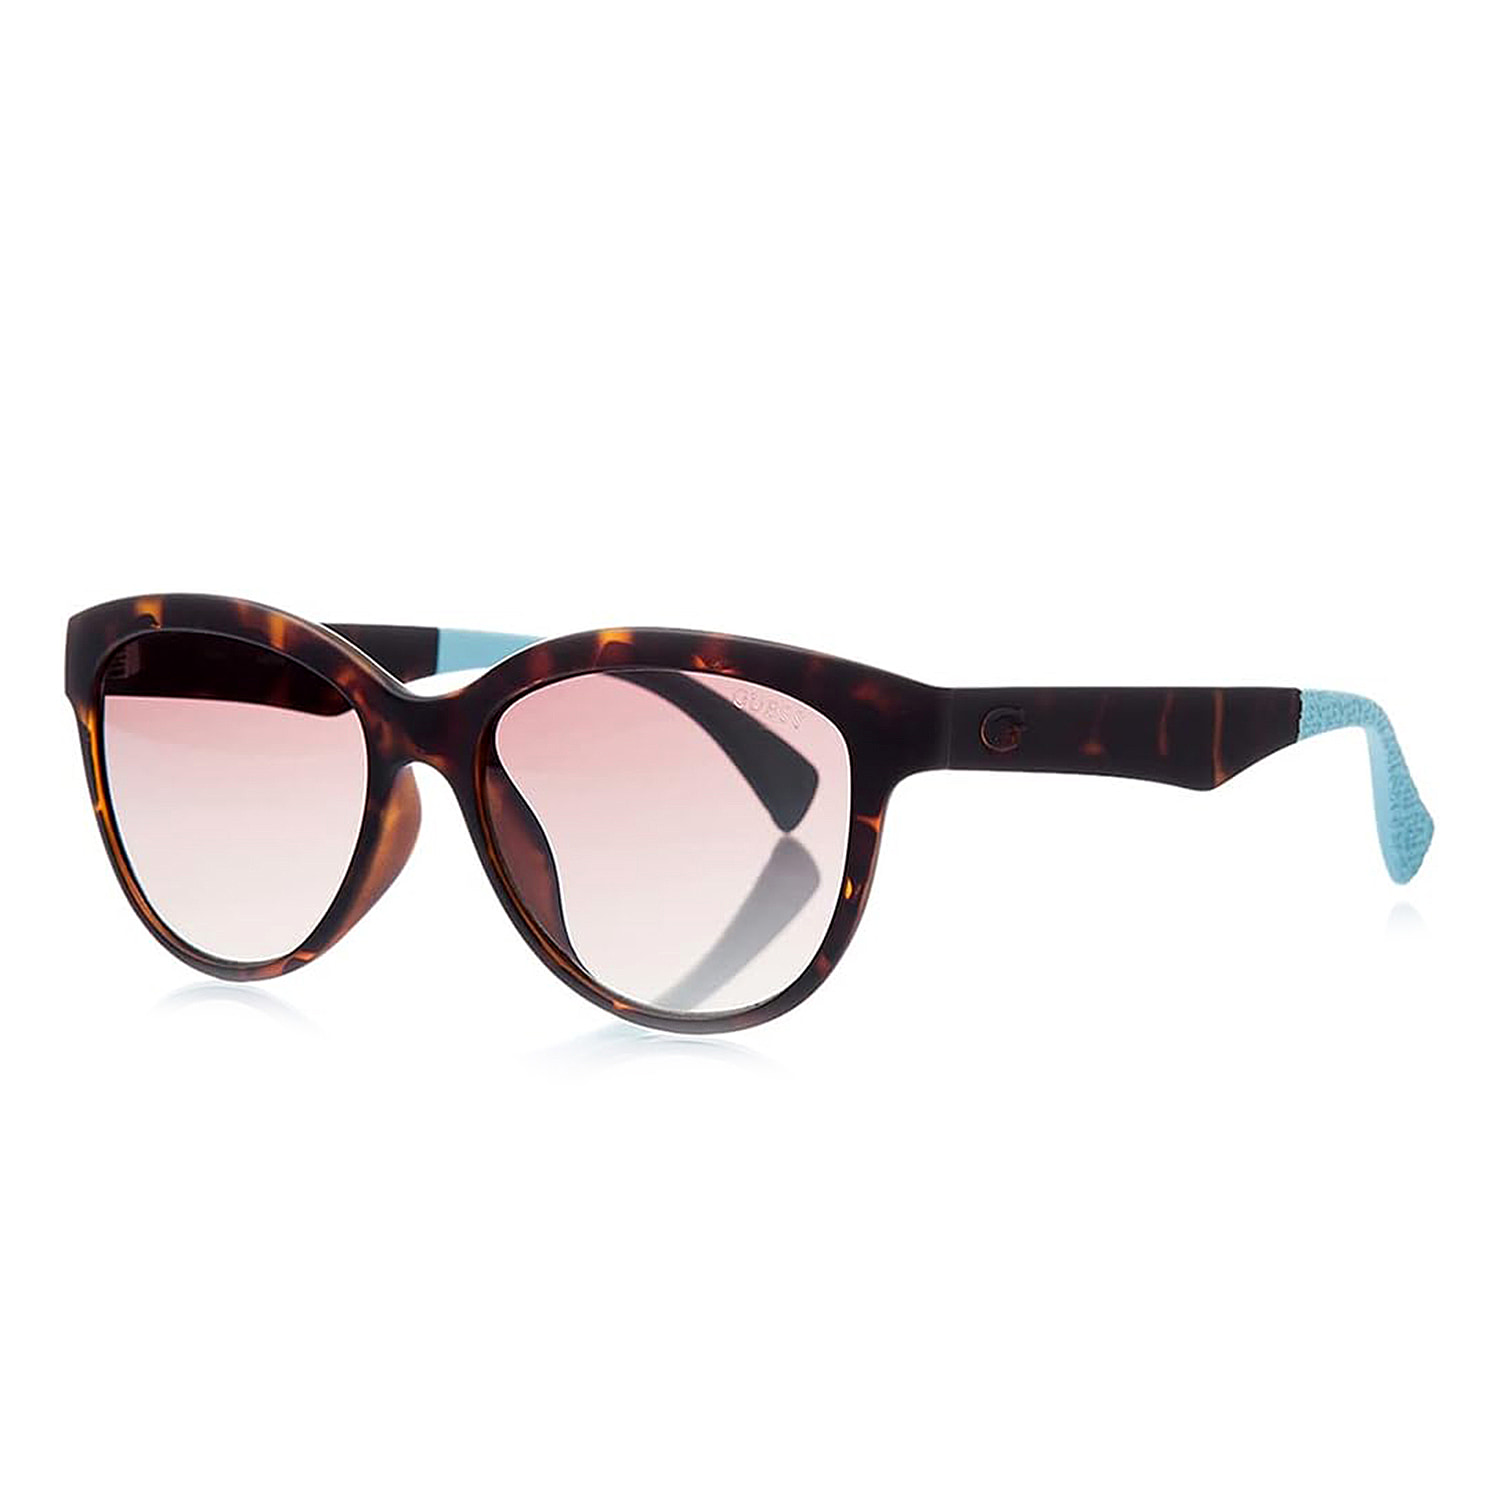 Summer Closeout - GUESS Pink Square Sunglasses with Brown Lenses